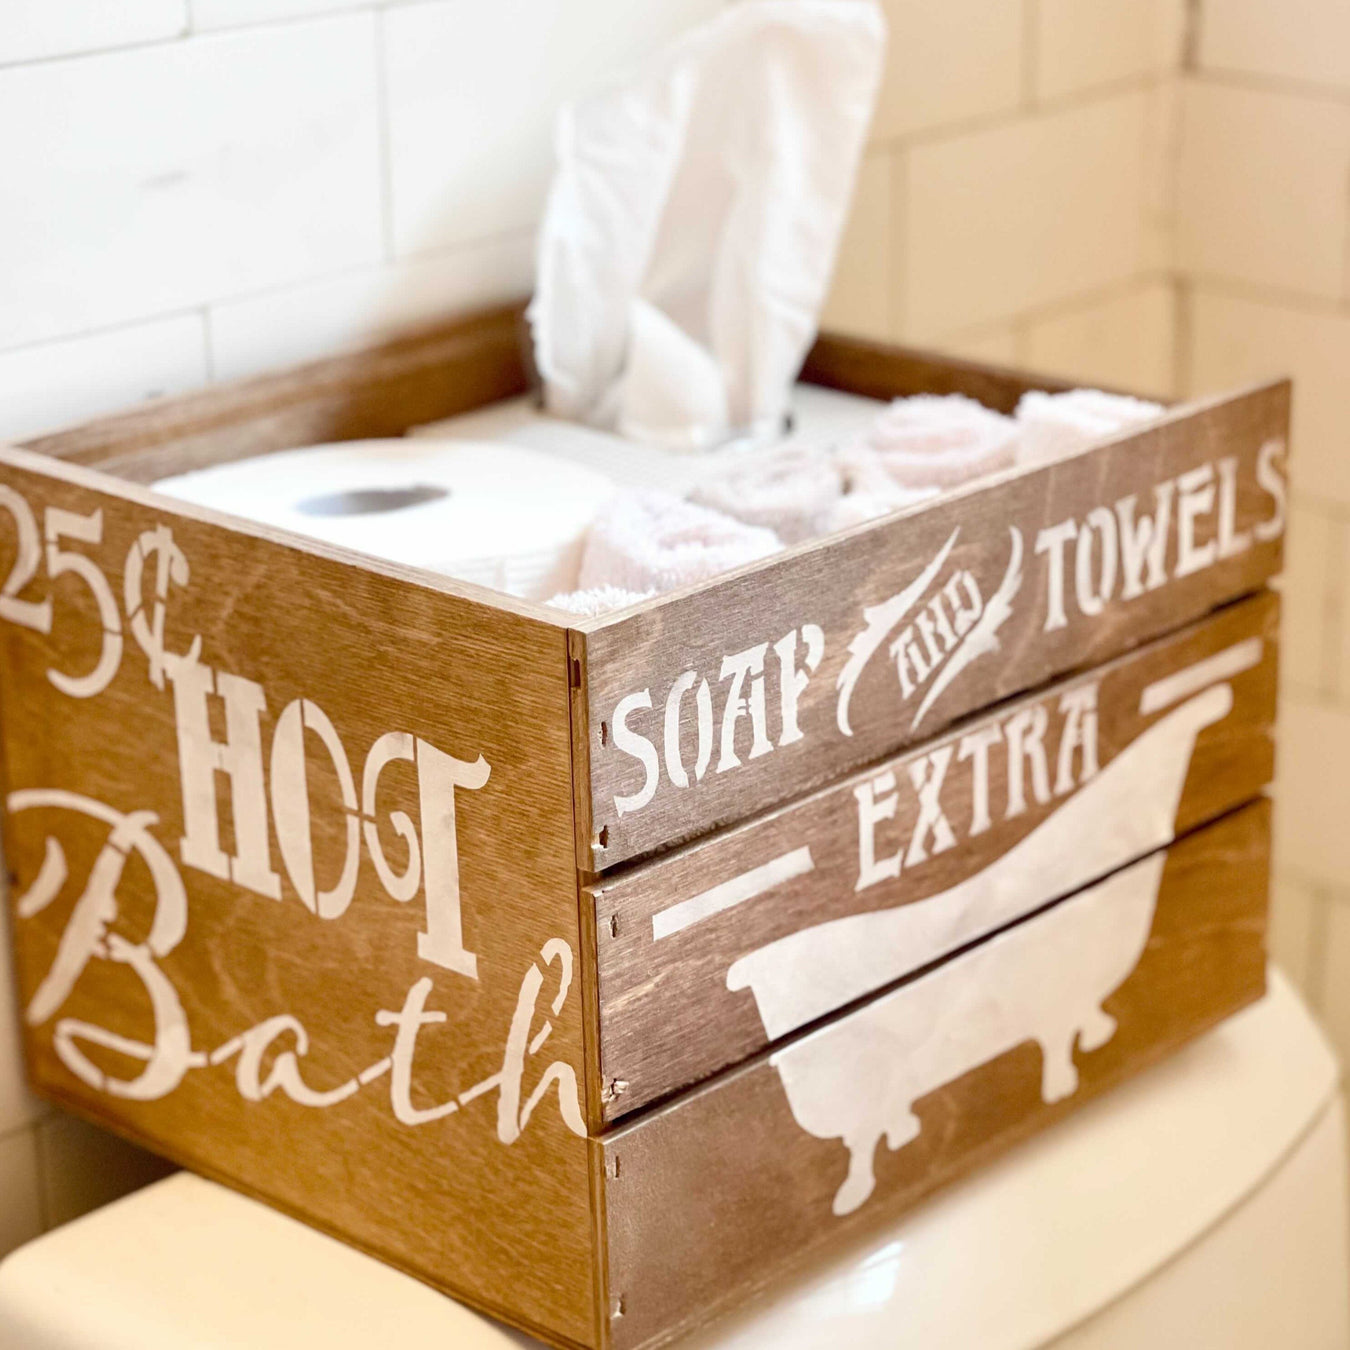 a wooden crate decorted with hot bath, soap and towels using paint stencil